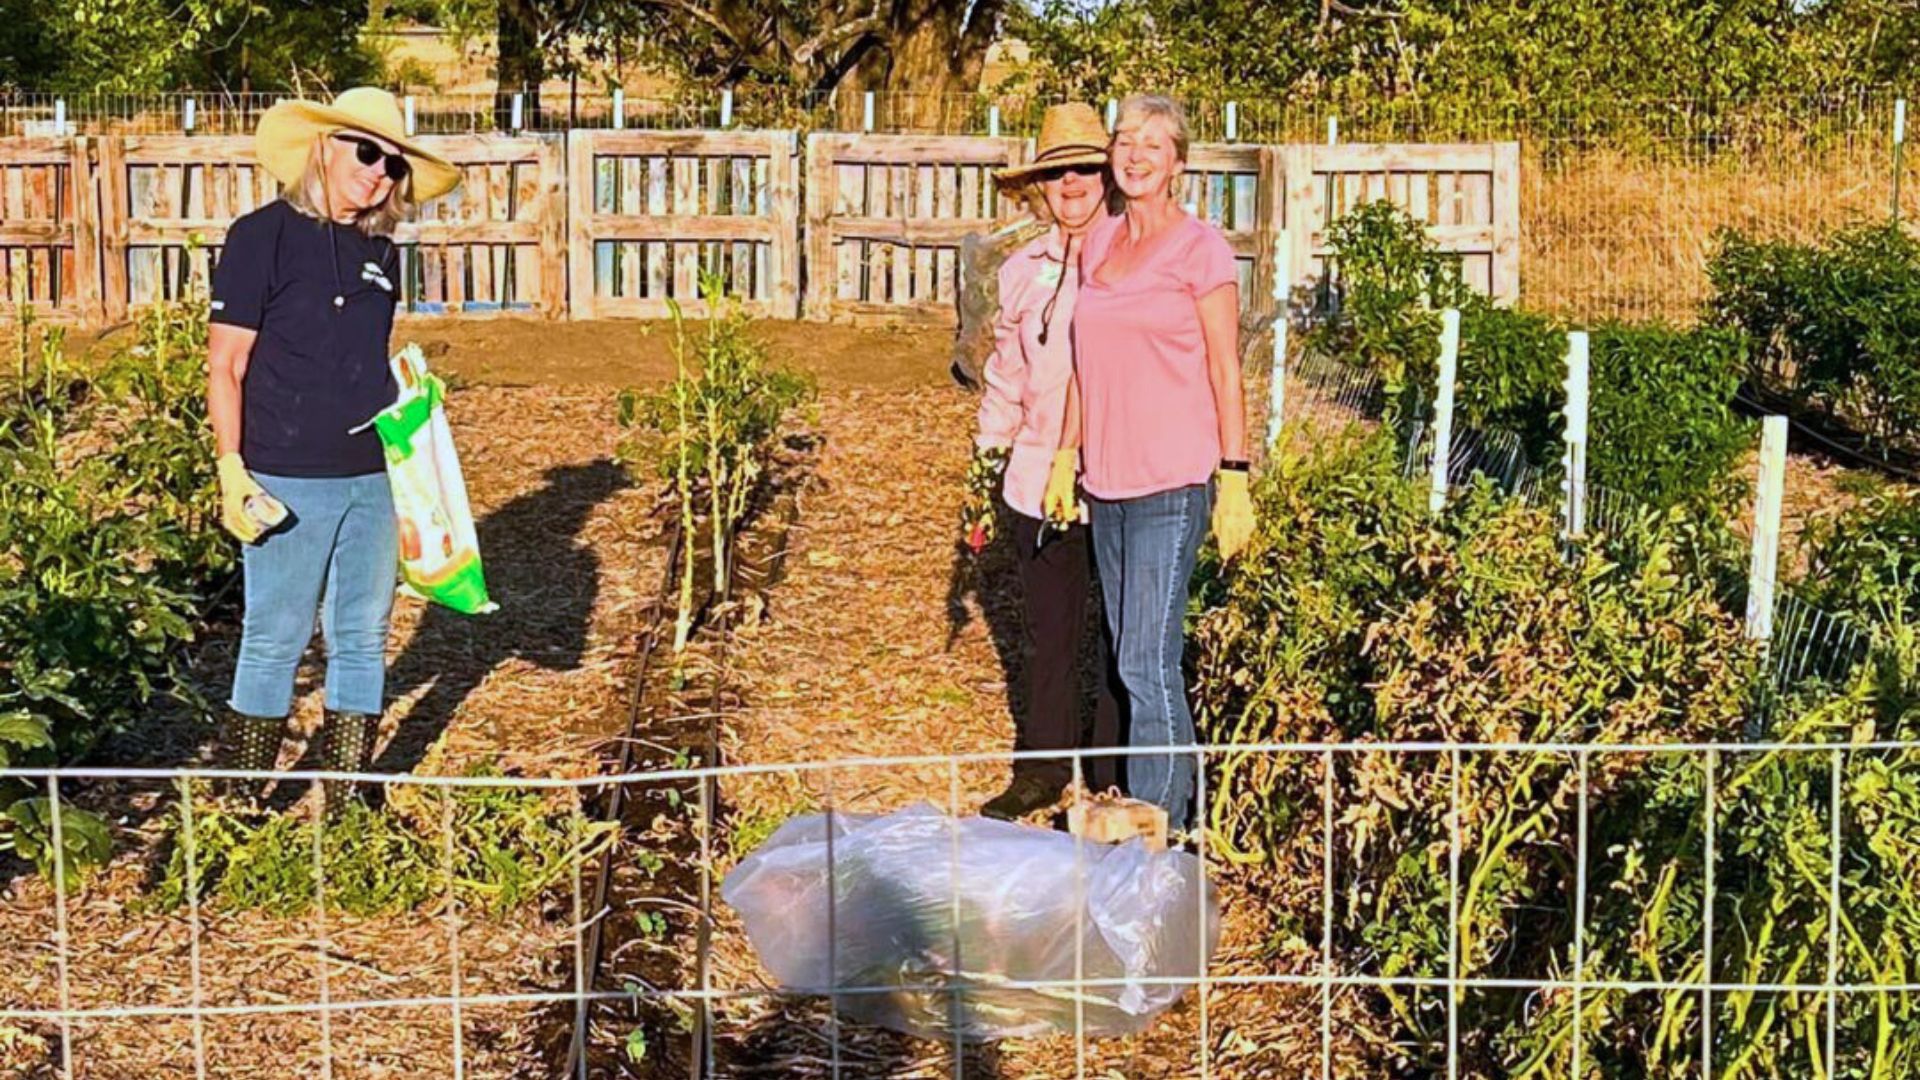 Photograph of volunteers at the Community Strong Farm.